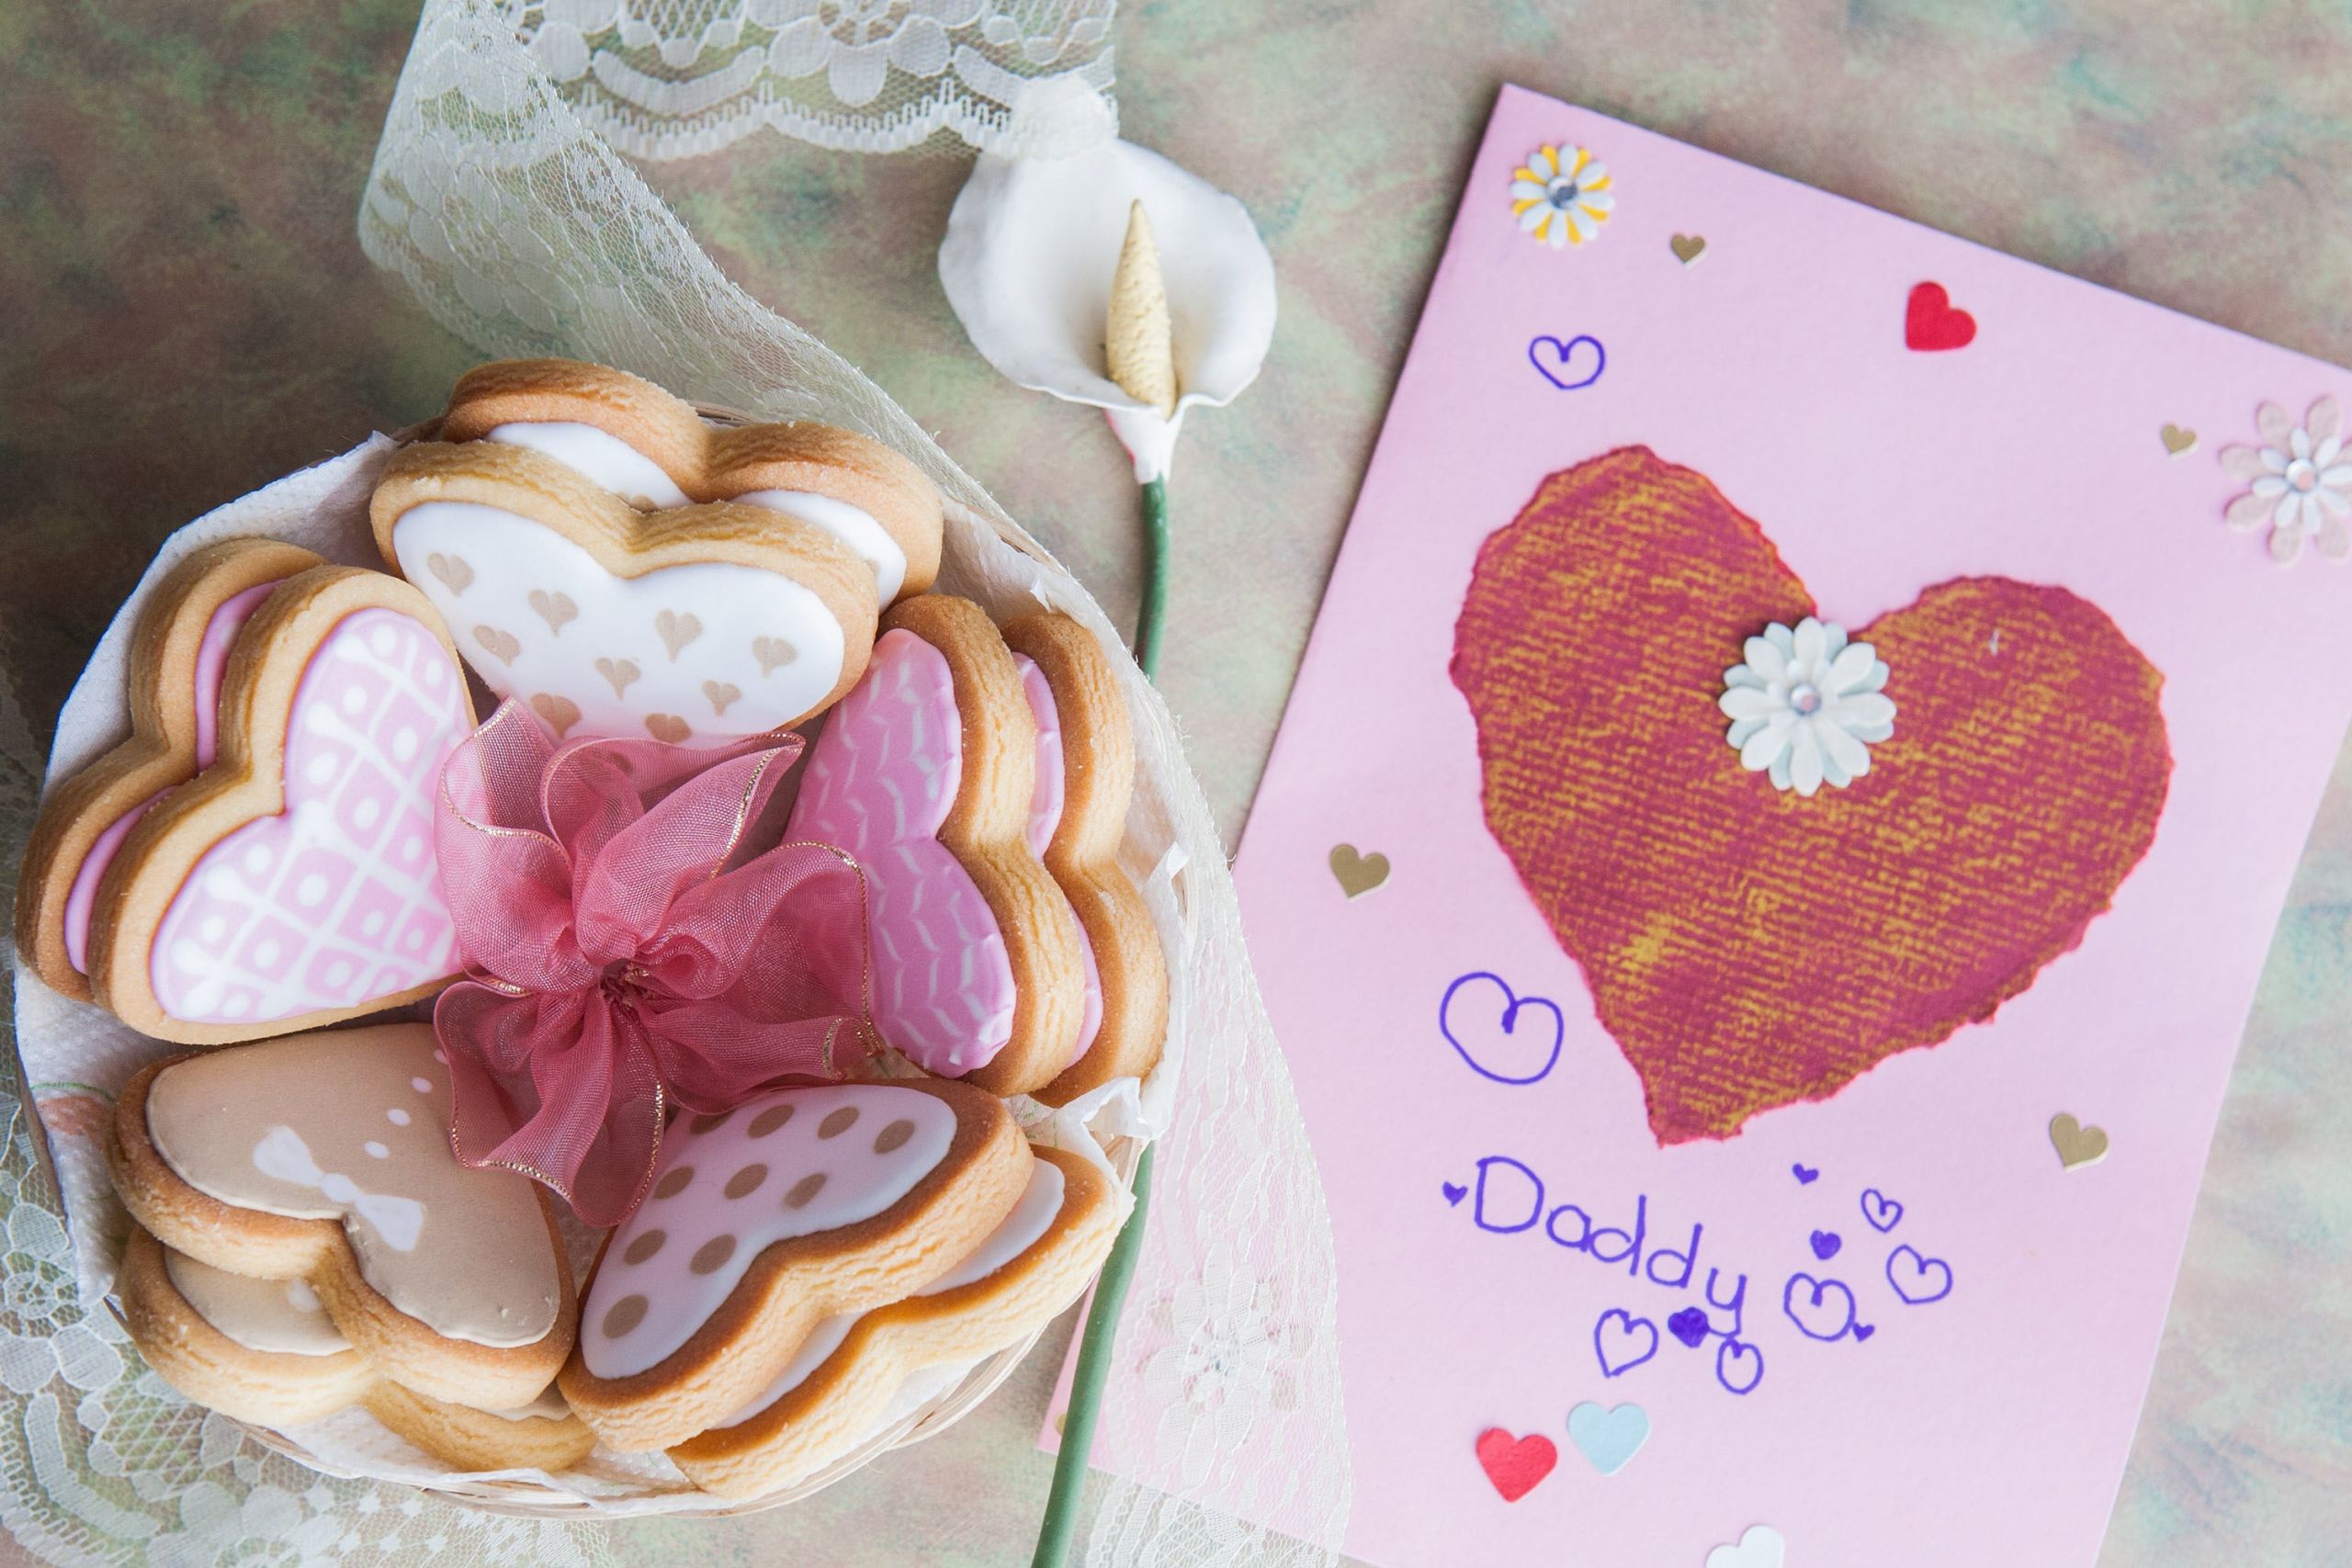 Valentine Gift Ideas For Daddy
 Homemade Valentine s Day Gift Ideas for Dad From Young